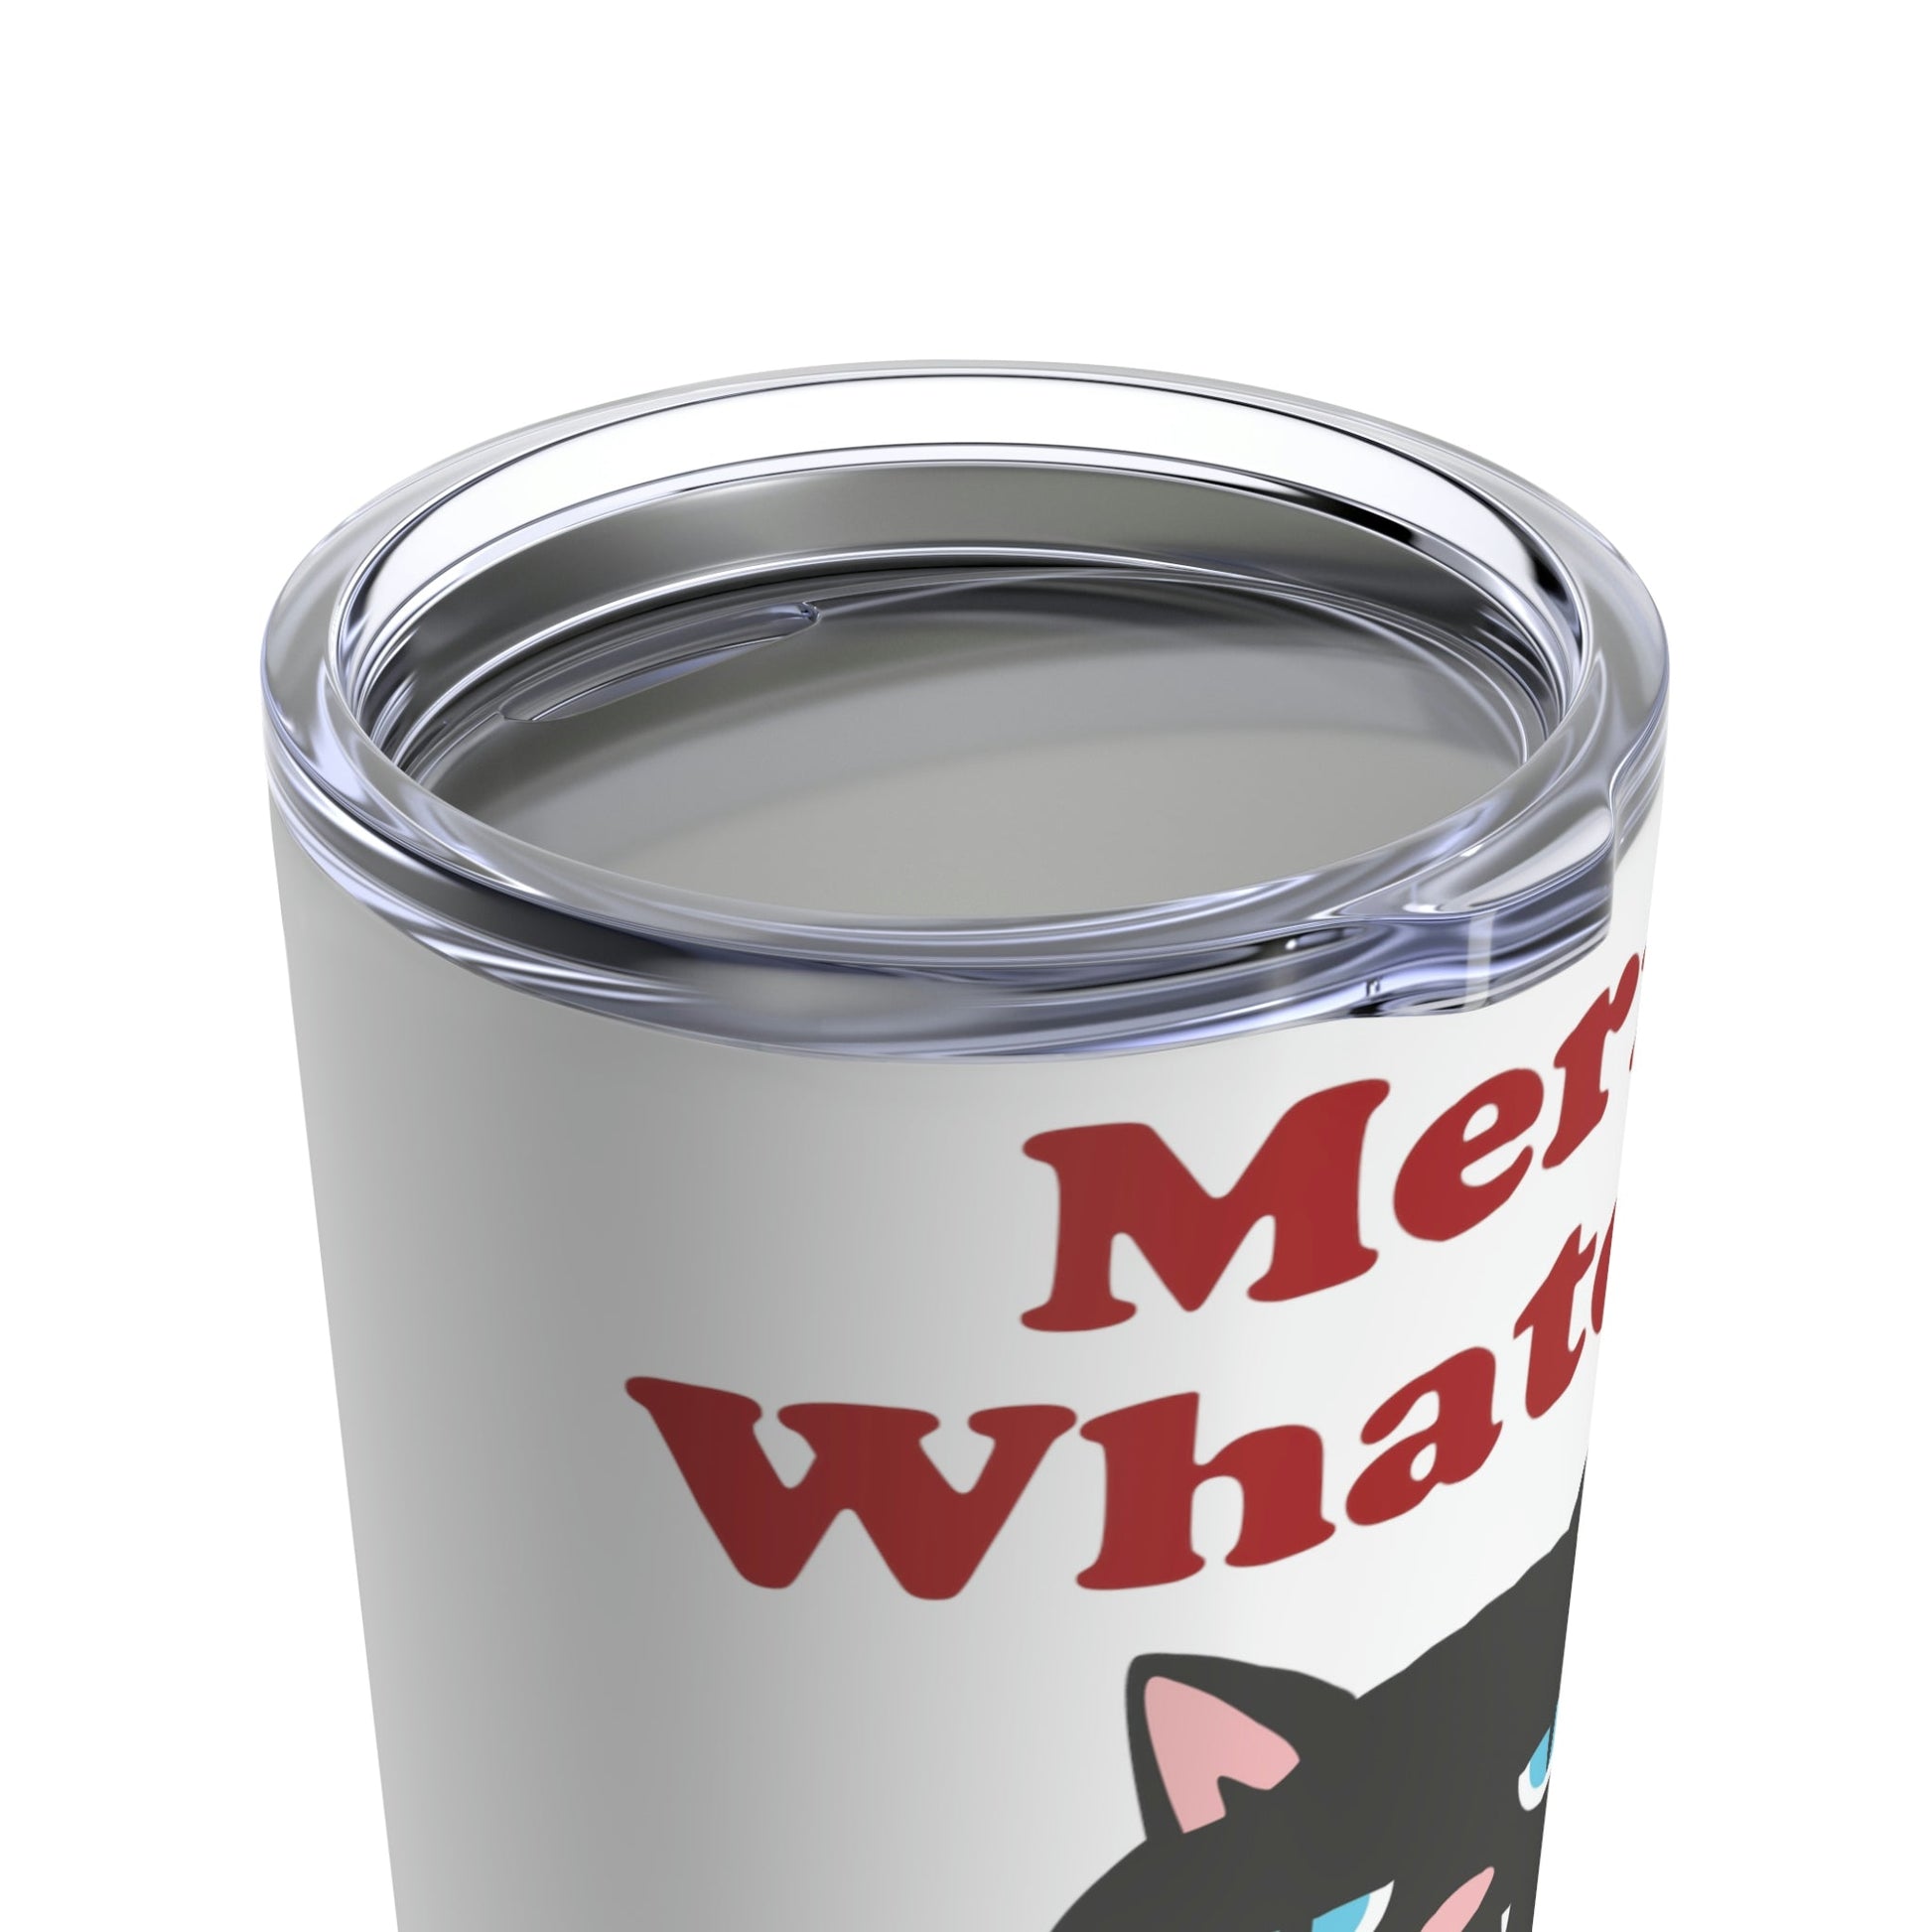 Merry Whatever Angry Christmas Cat Stainless Steel Hot or Cold Vacuum Tumbler 20oz Ichaku [Perfect Gifts Selection]